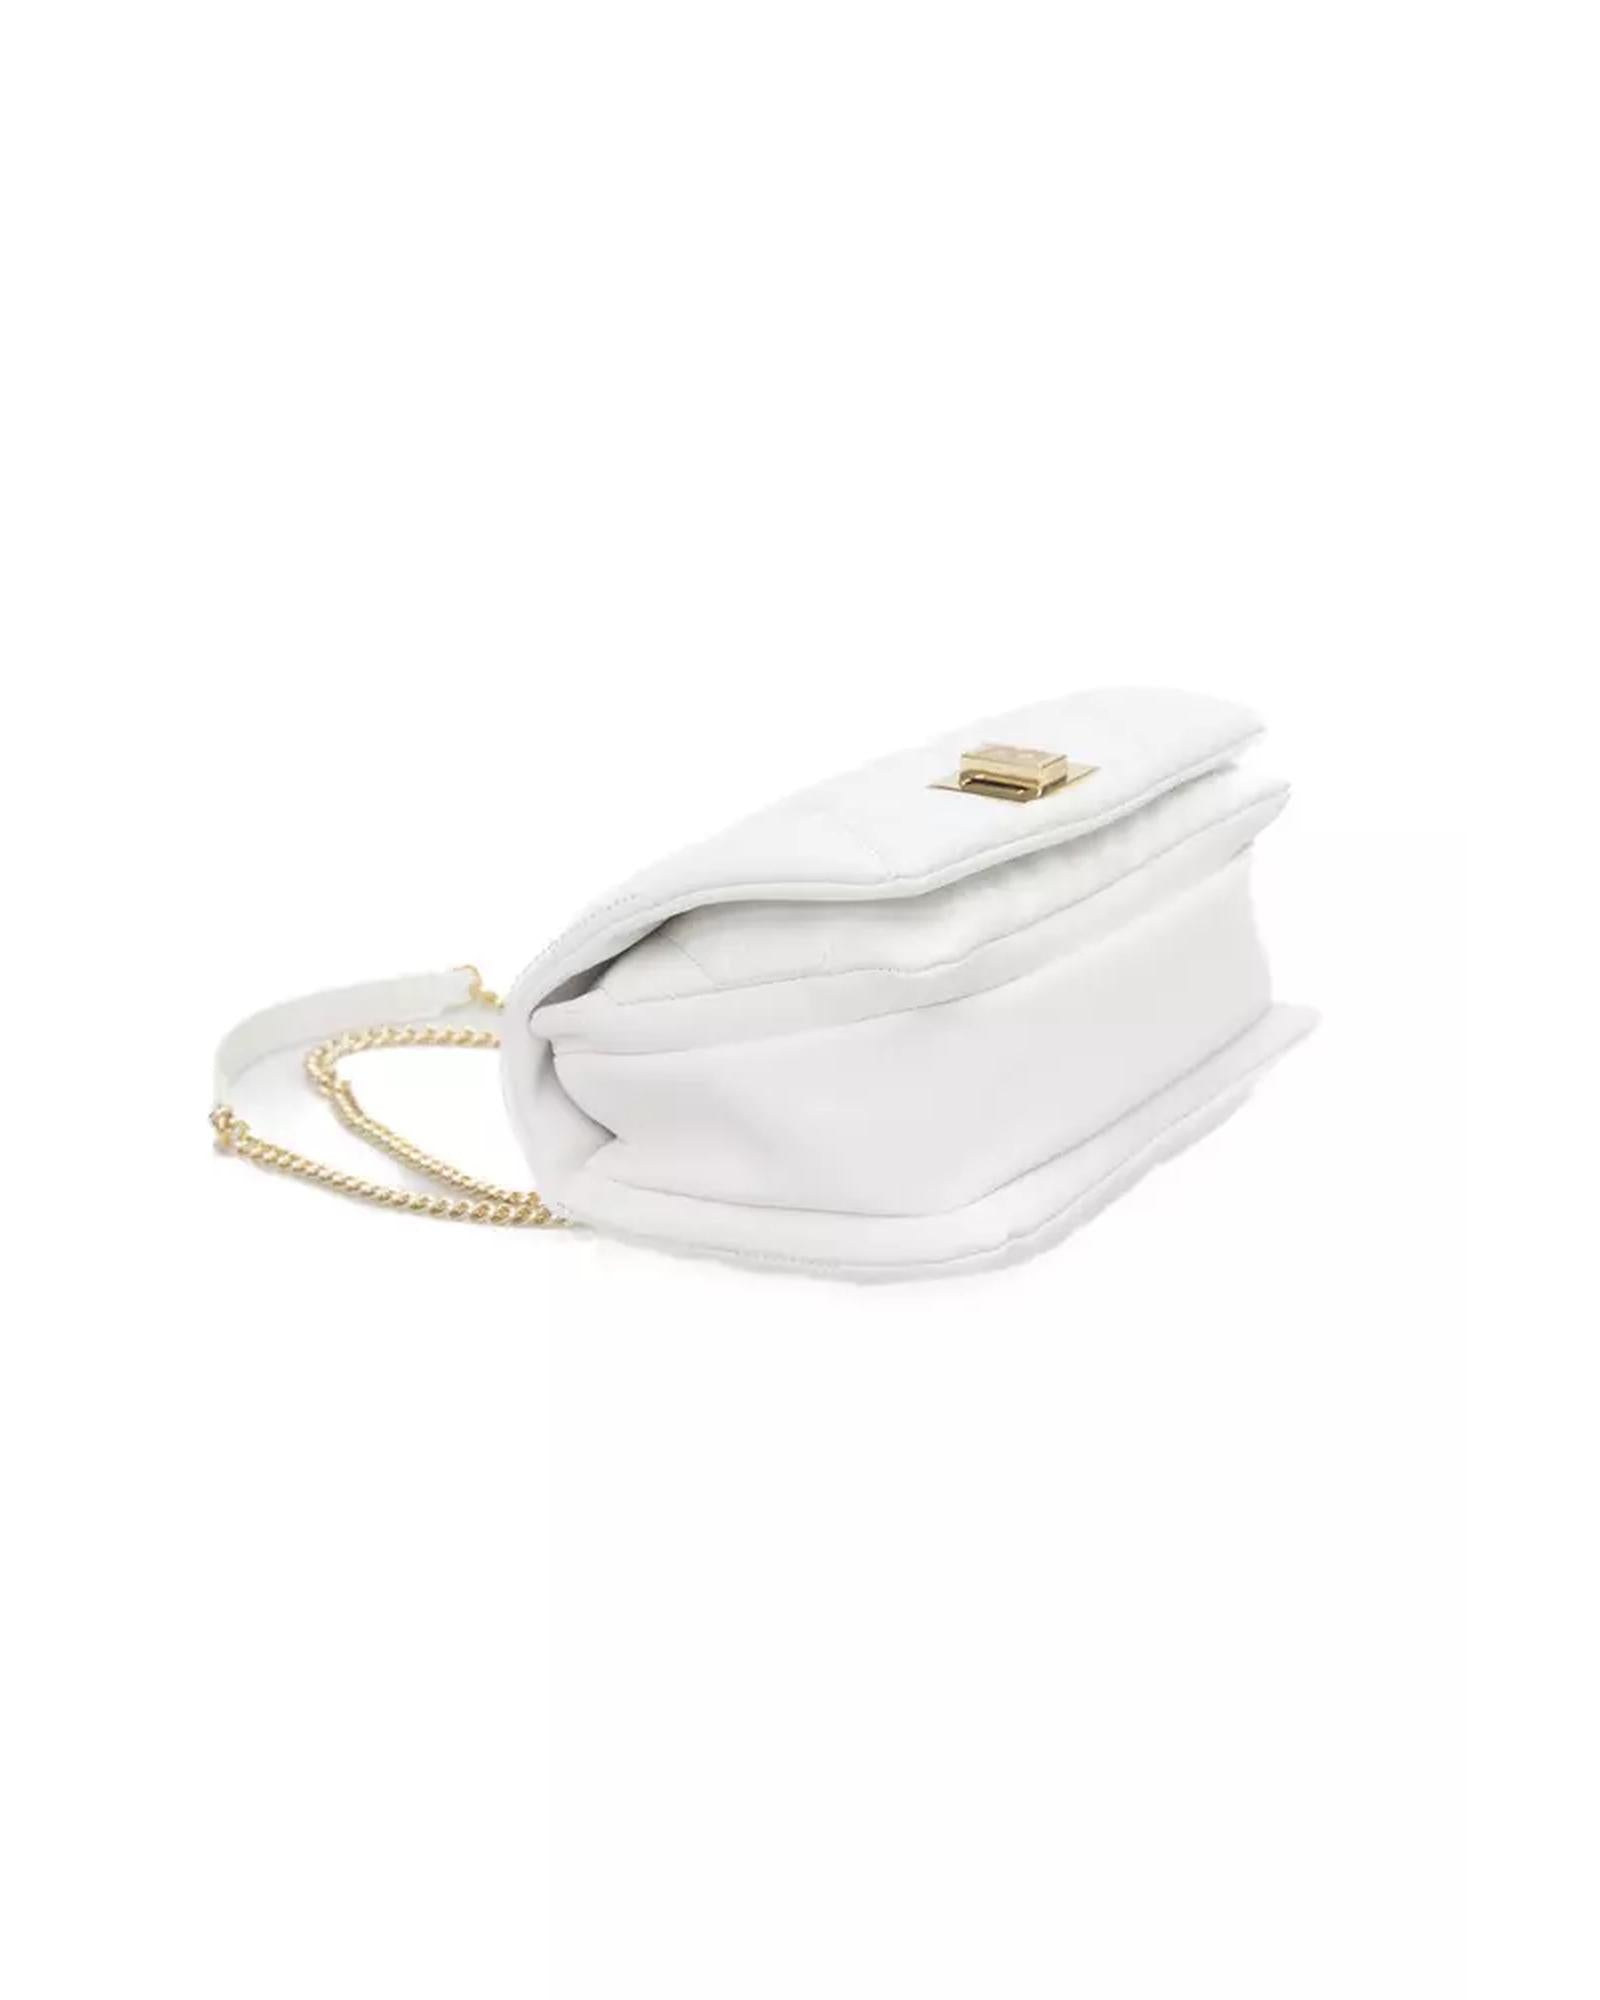 Flap Closure Shoulder Bag with Internal Compartments and Golden Details One Size Women